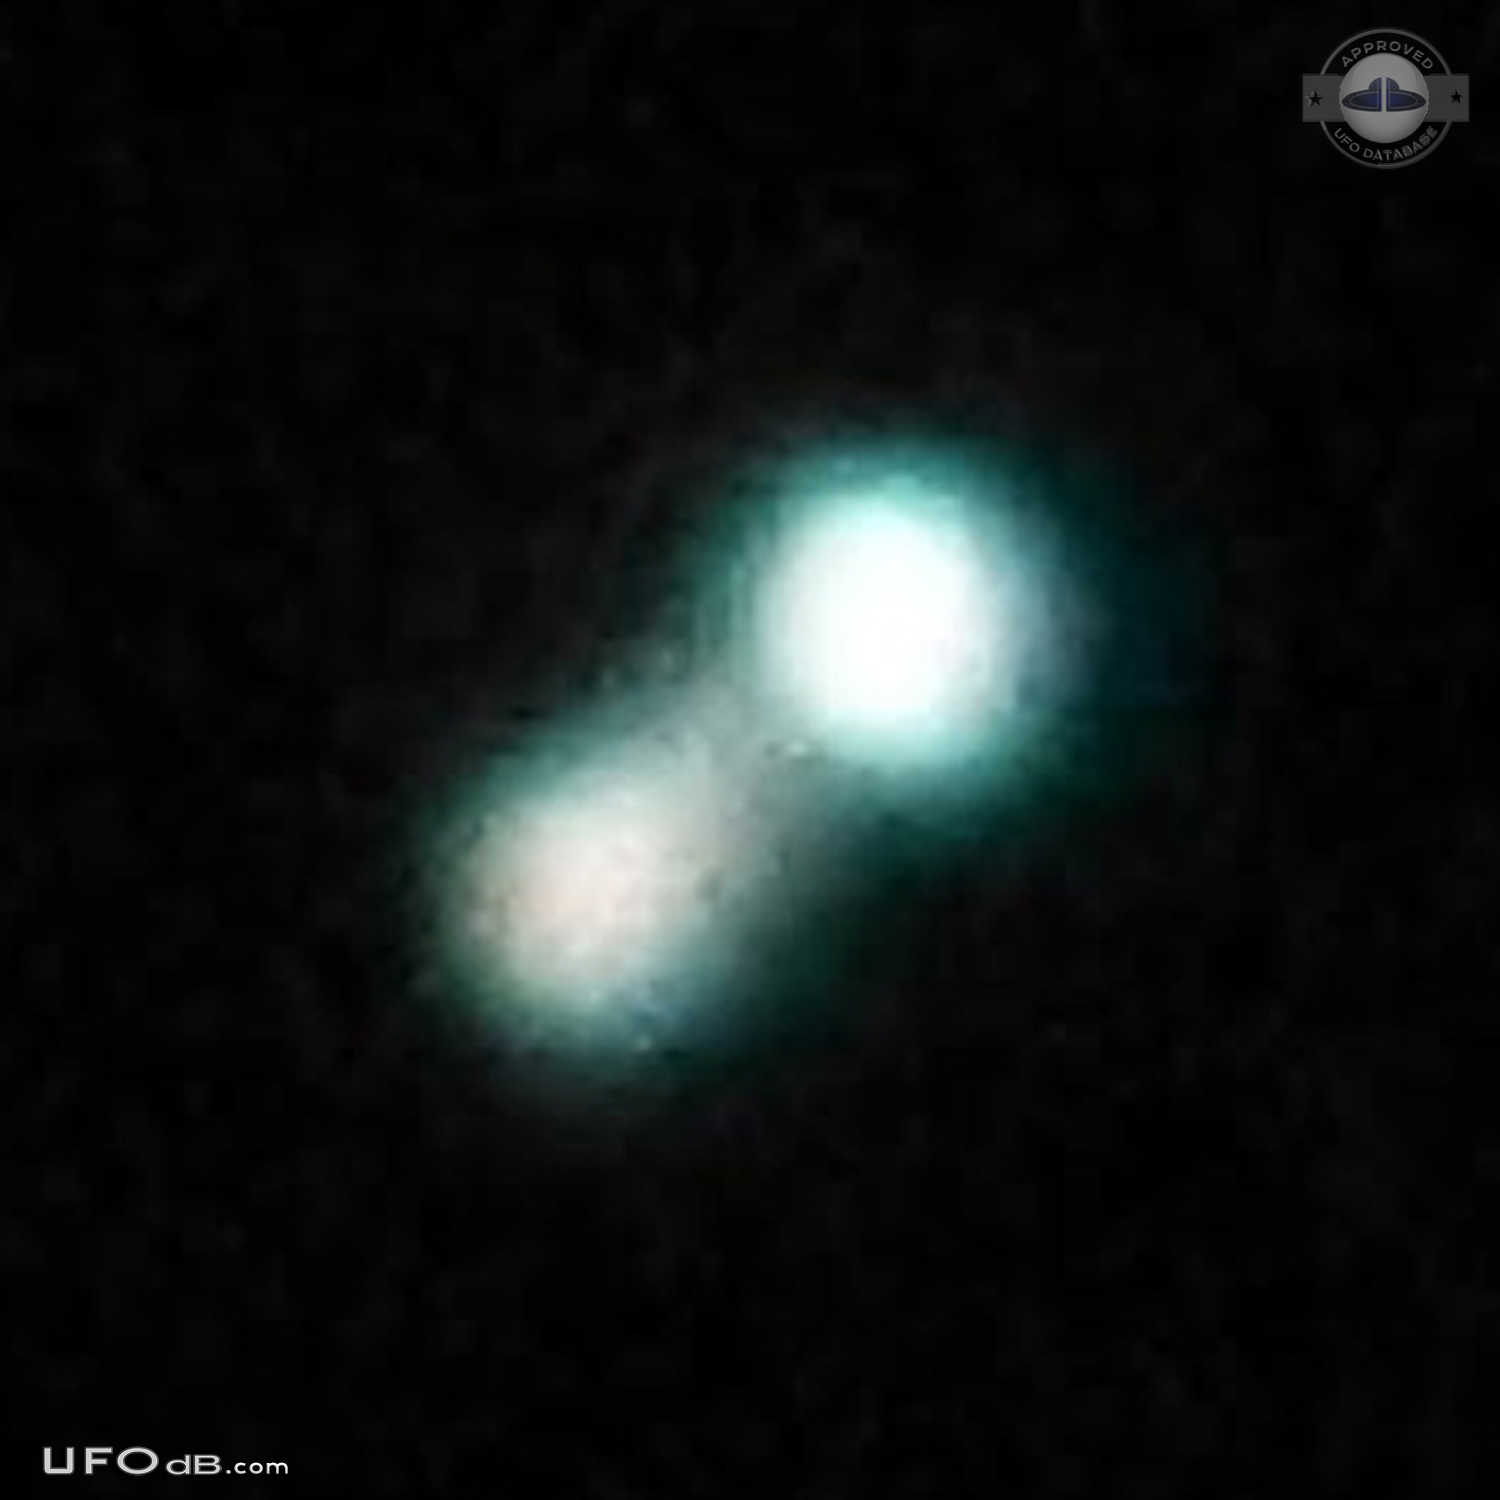 Very bright star UFO over Port Moresby, Papua New Guinea January 2015 UFO Picture #594-5